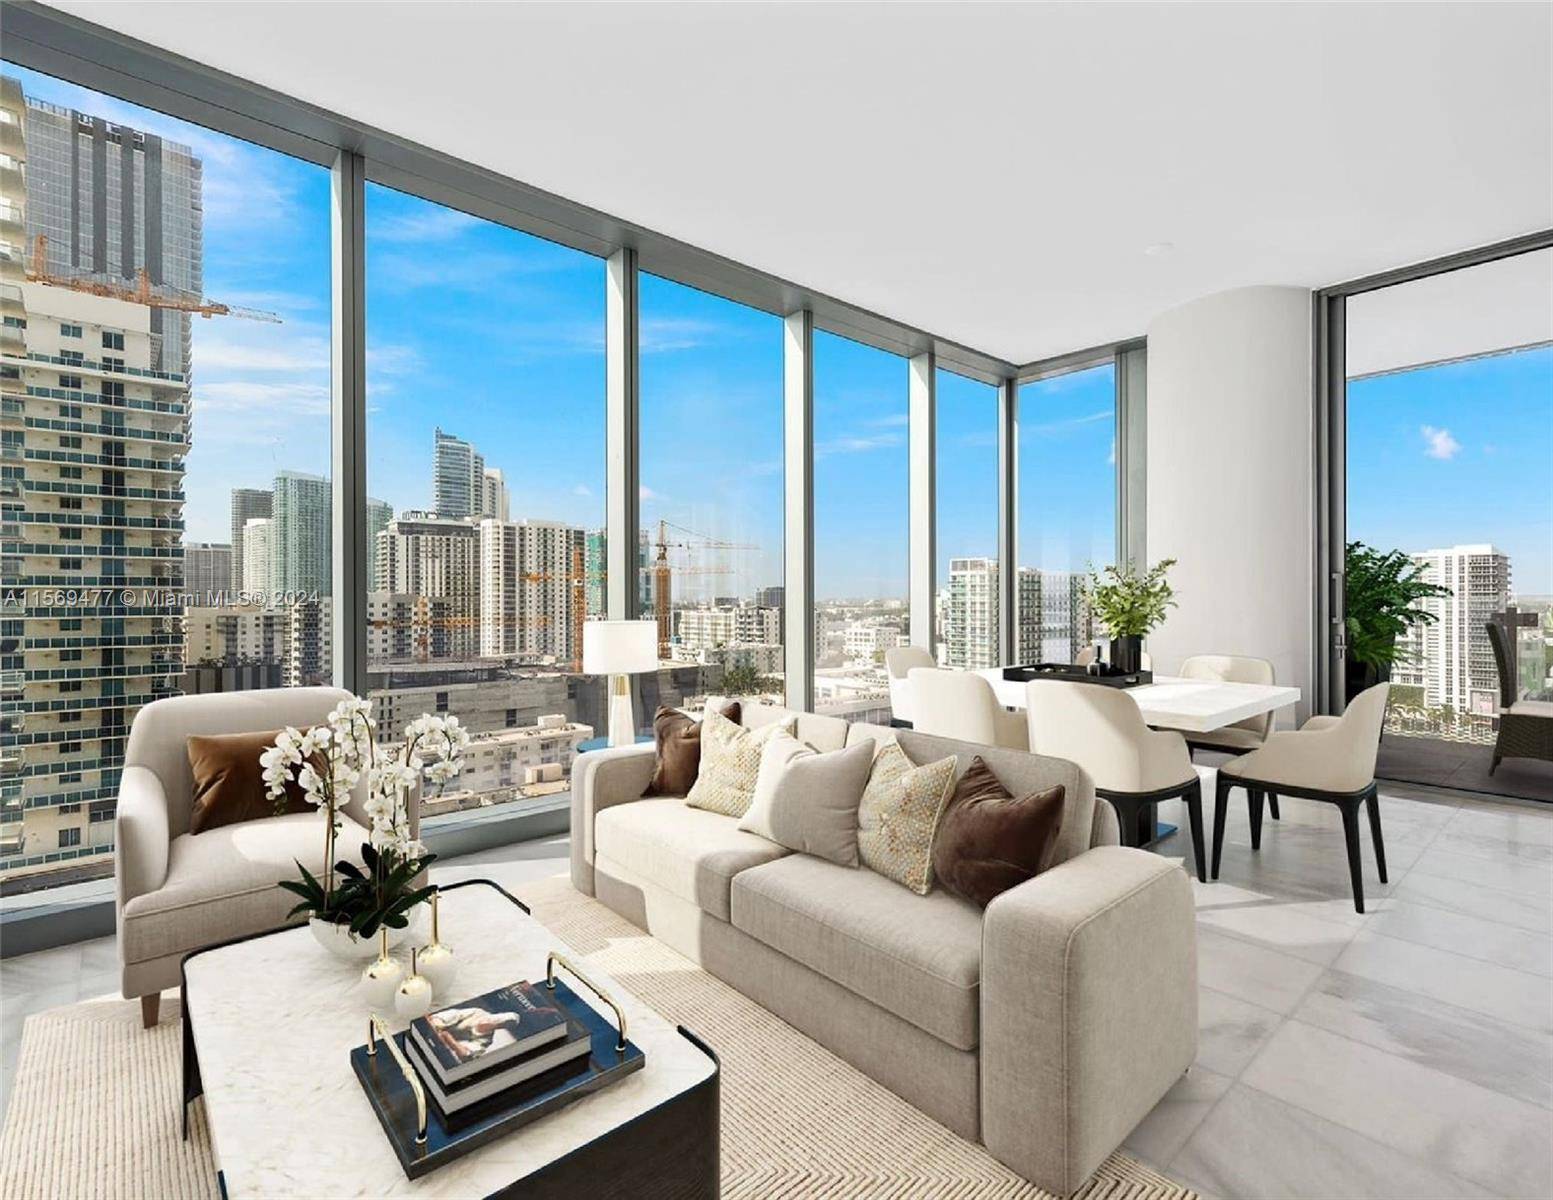 Experience Miami's vibrant waterfront lifestyle at Missoni Baia, where luxury meets contemporary design in every detail, be the first to own this stunning corner 2 bed 2 bath residence, with ...